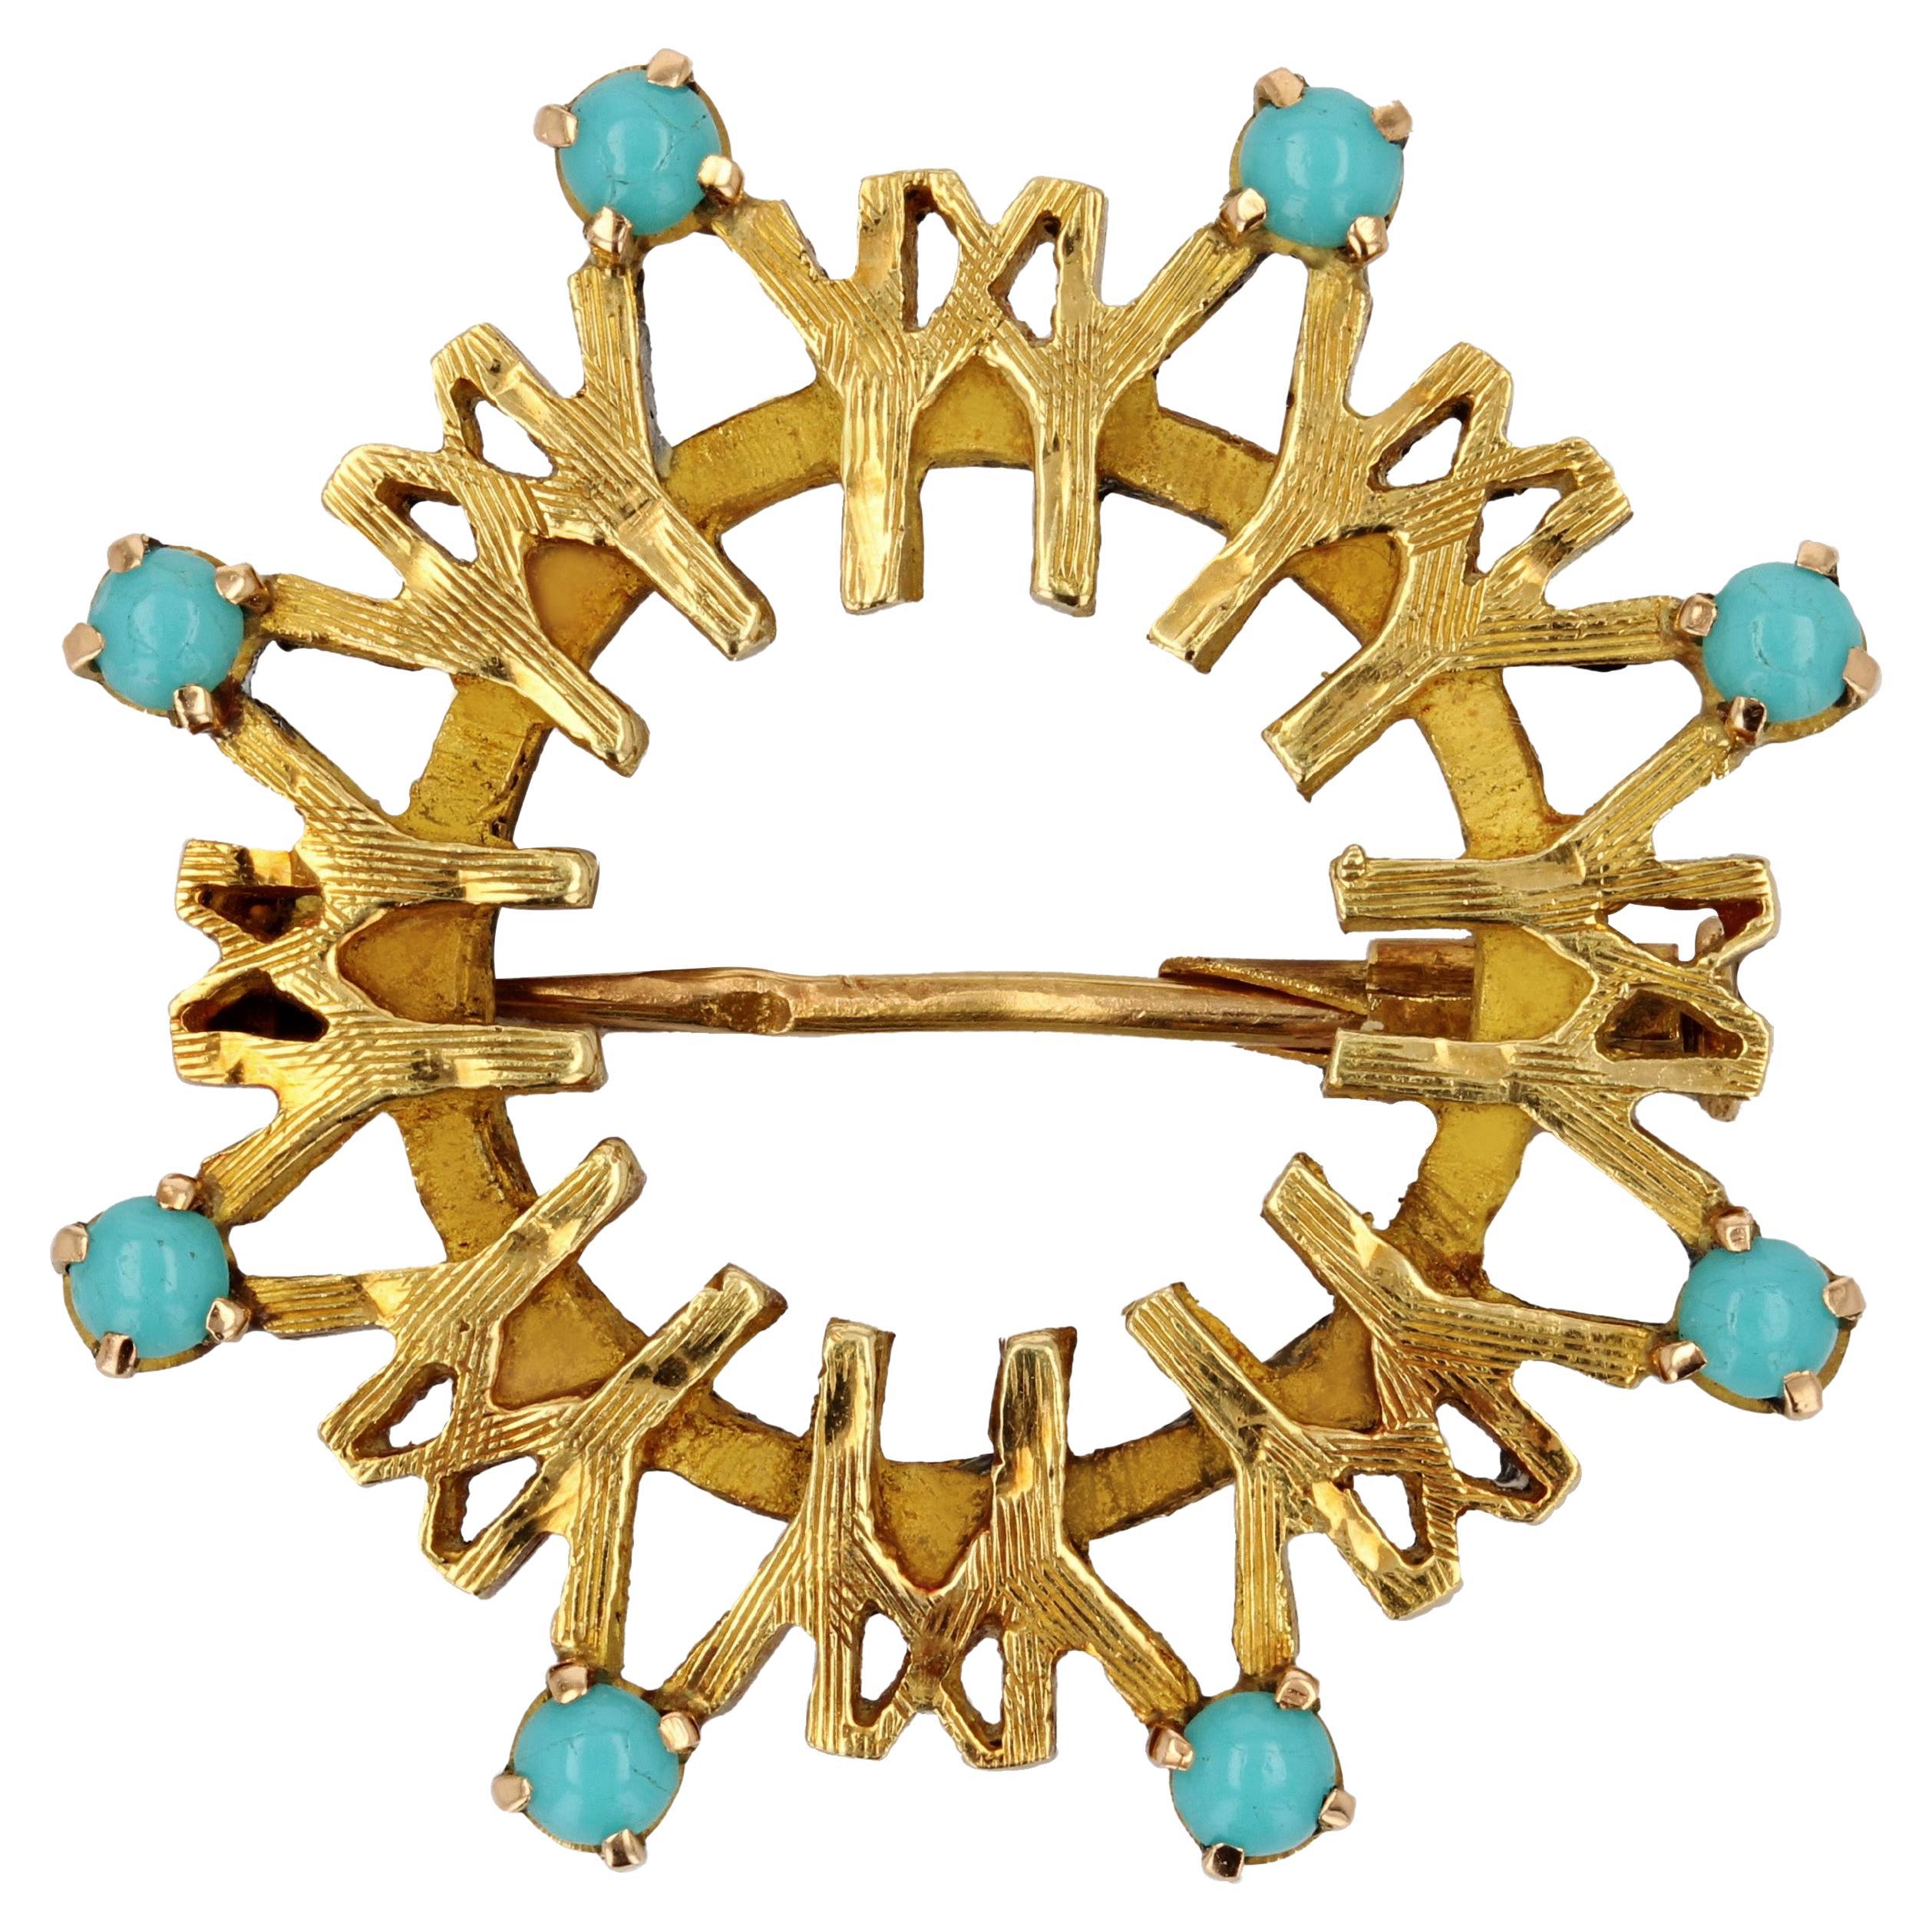 1967 Montreal Universal Exhibition Turquoise Gold Brooch